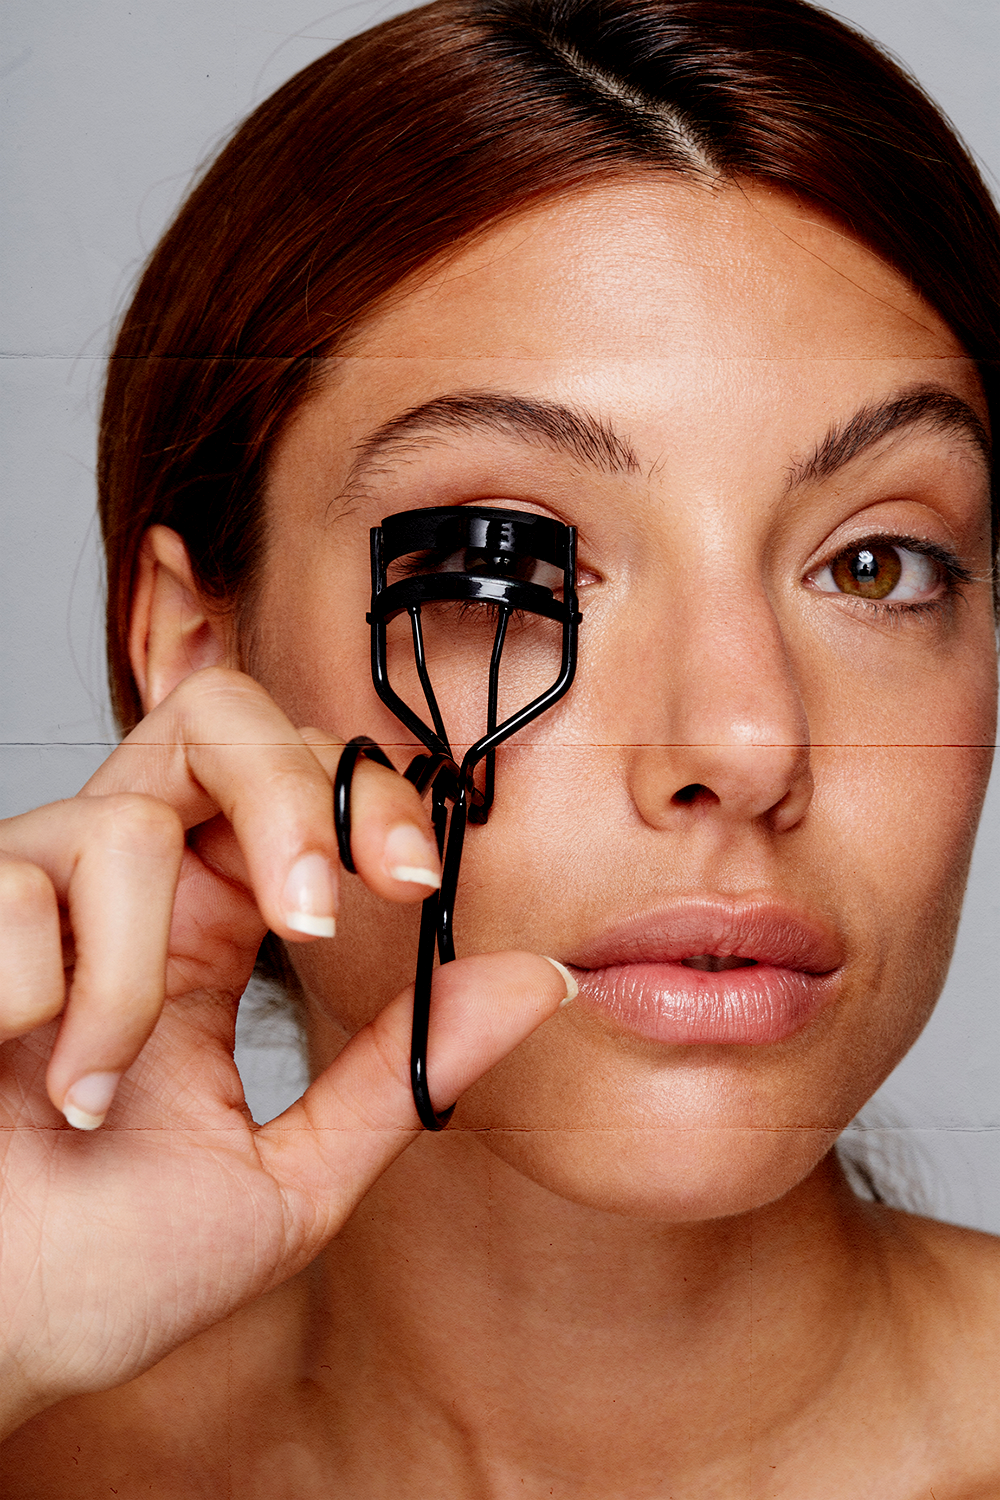 13 Best Eyelash Curlers Of 2023 For Lifted, Volumized Lashes